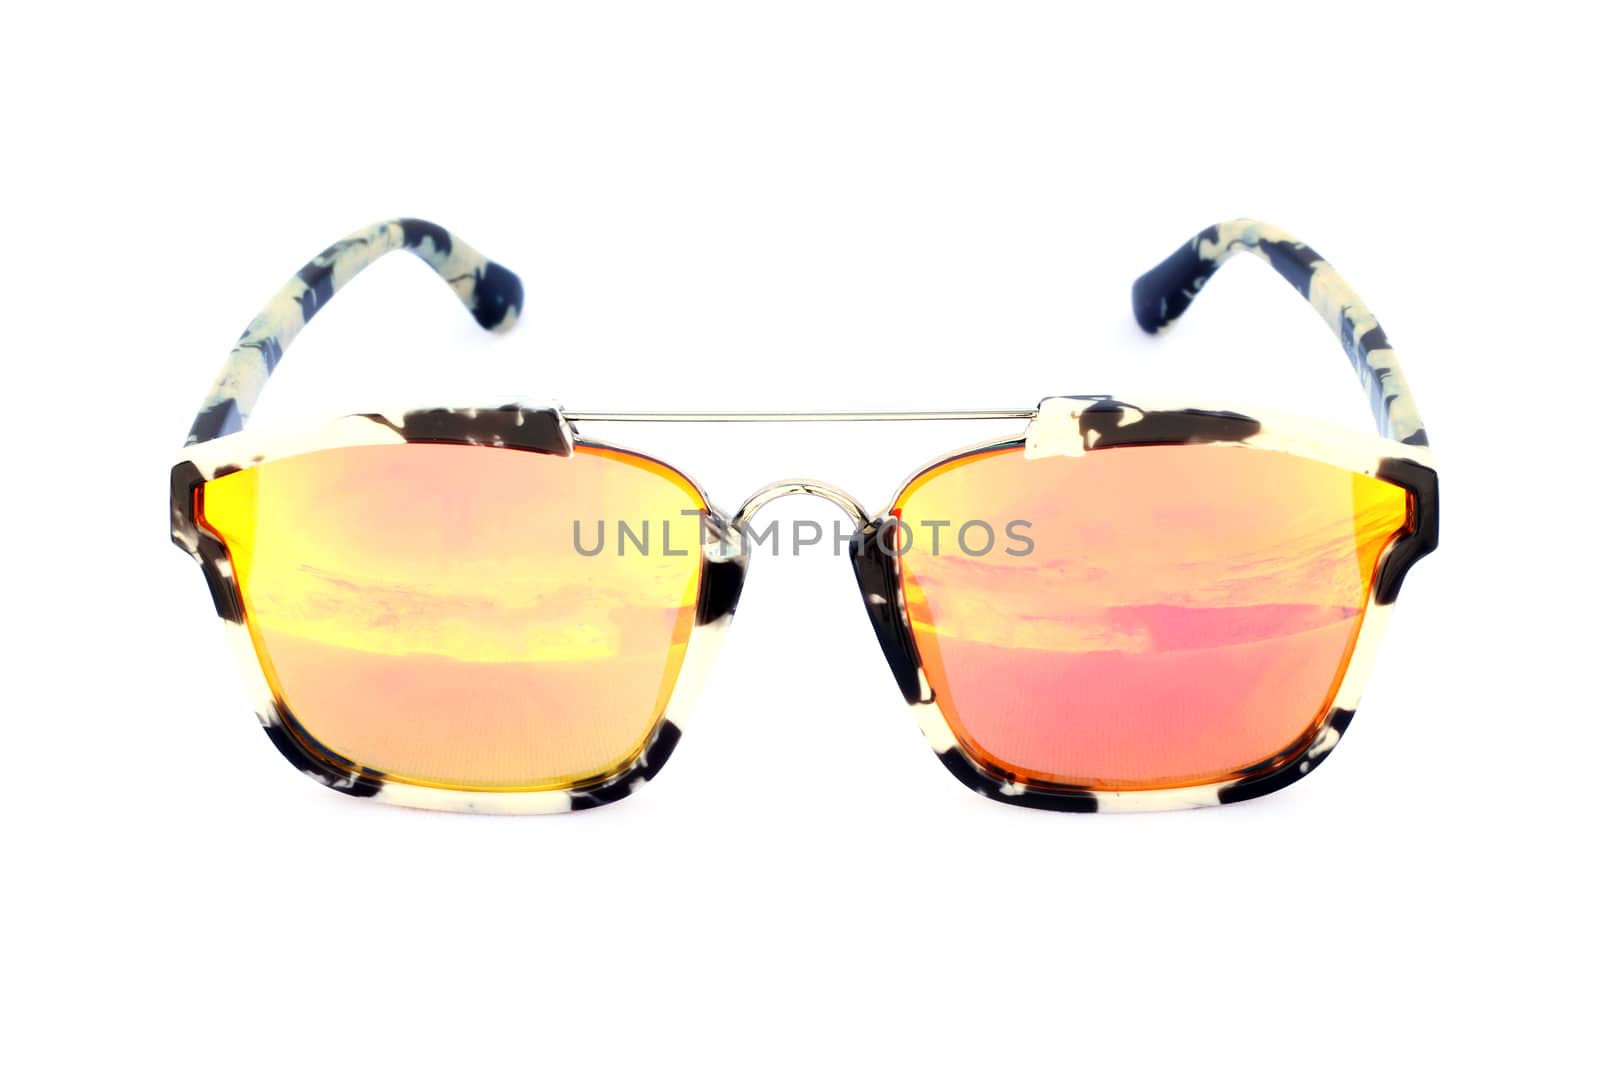 Image of sunglasses on a white background by yod67